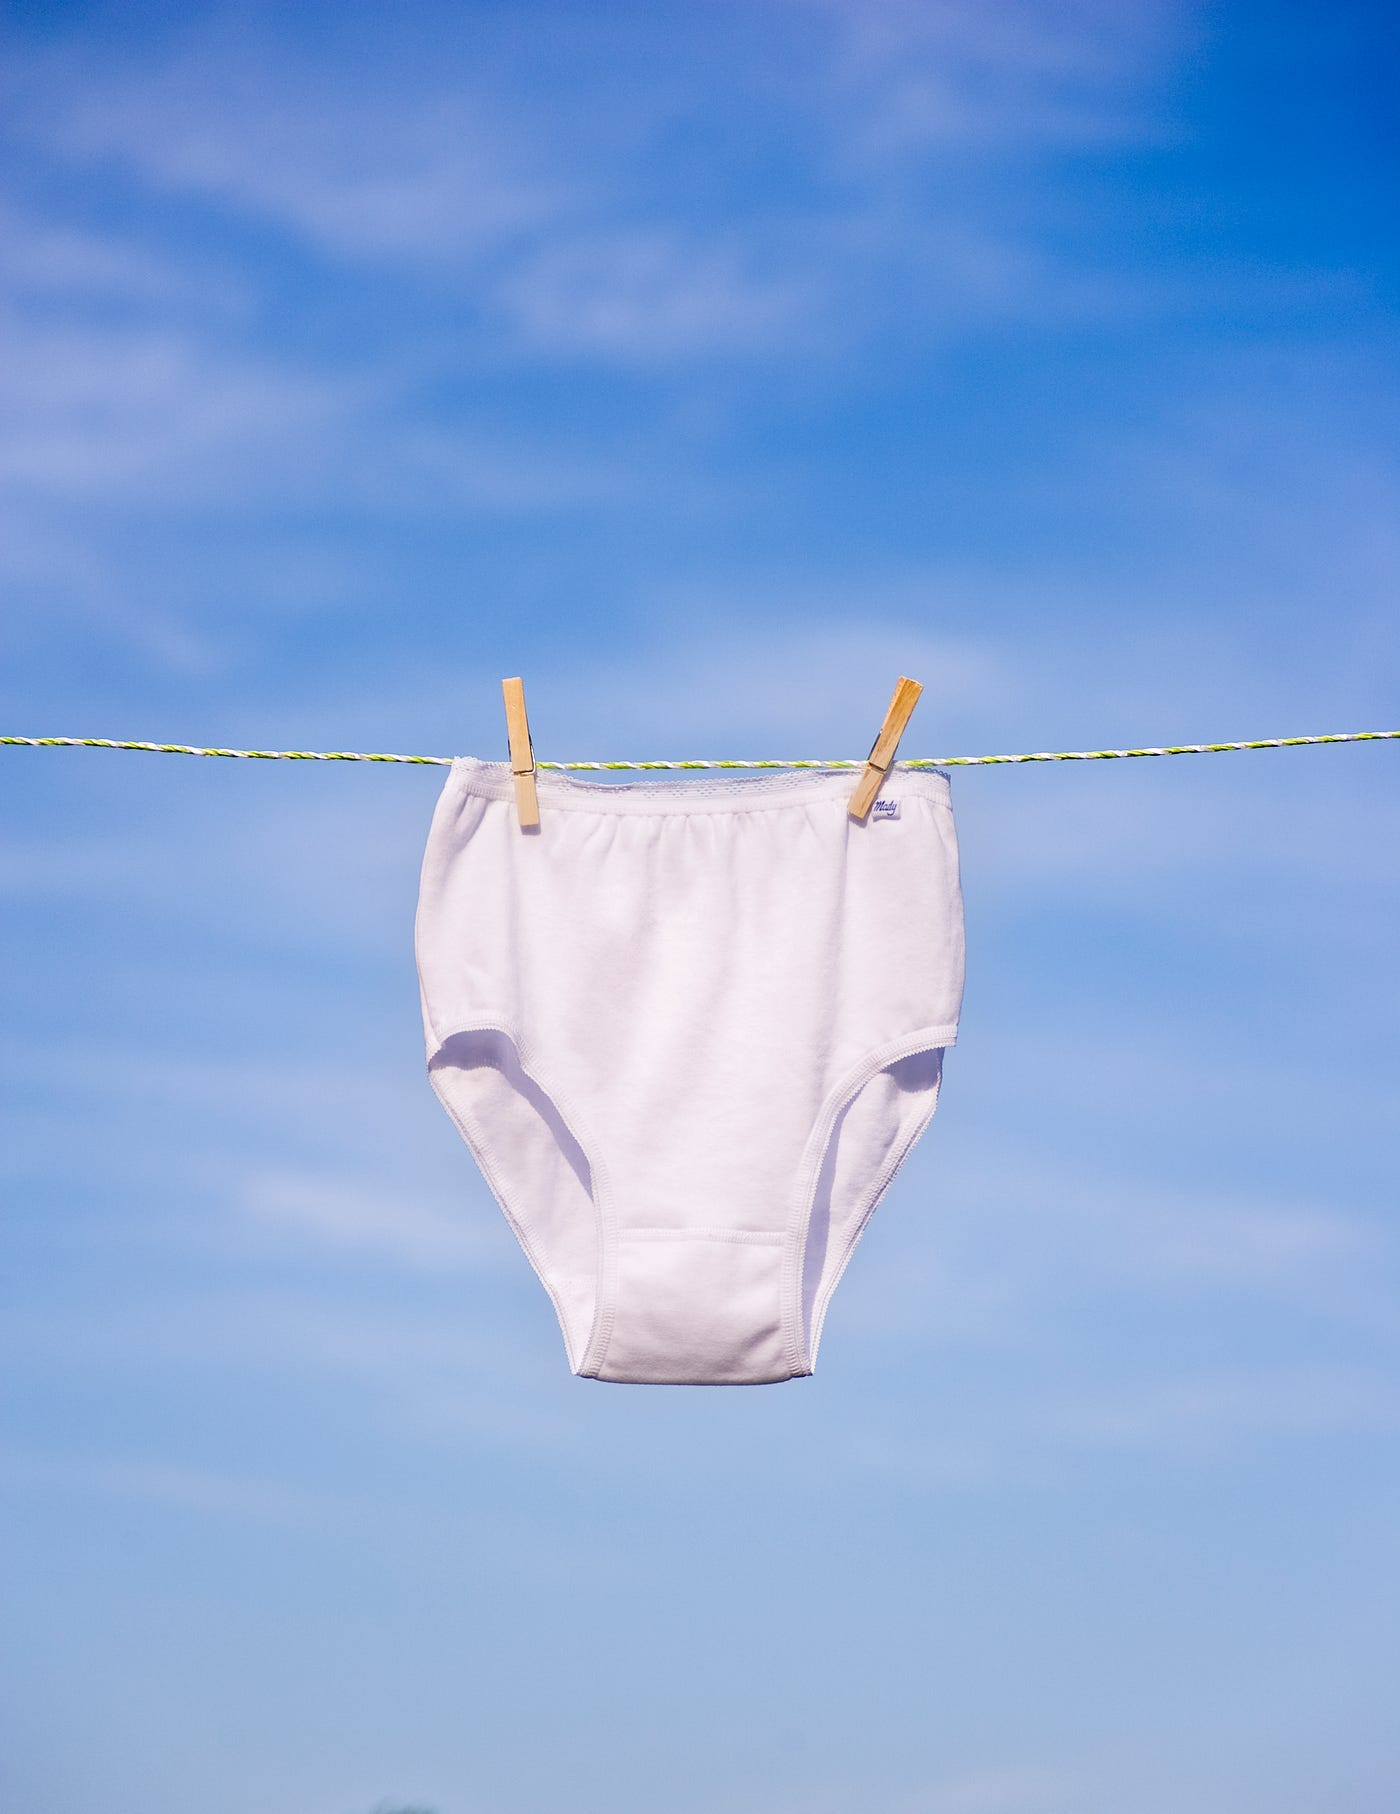 3 Surprising Things You Need To Know About Wearing Big Knickers